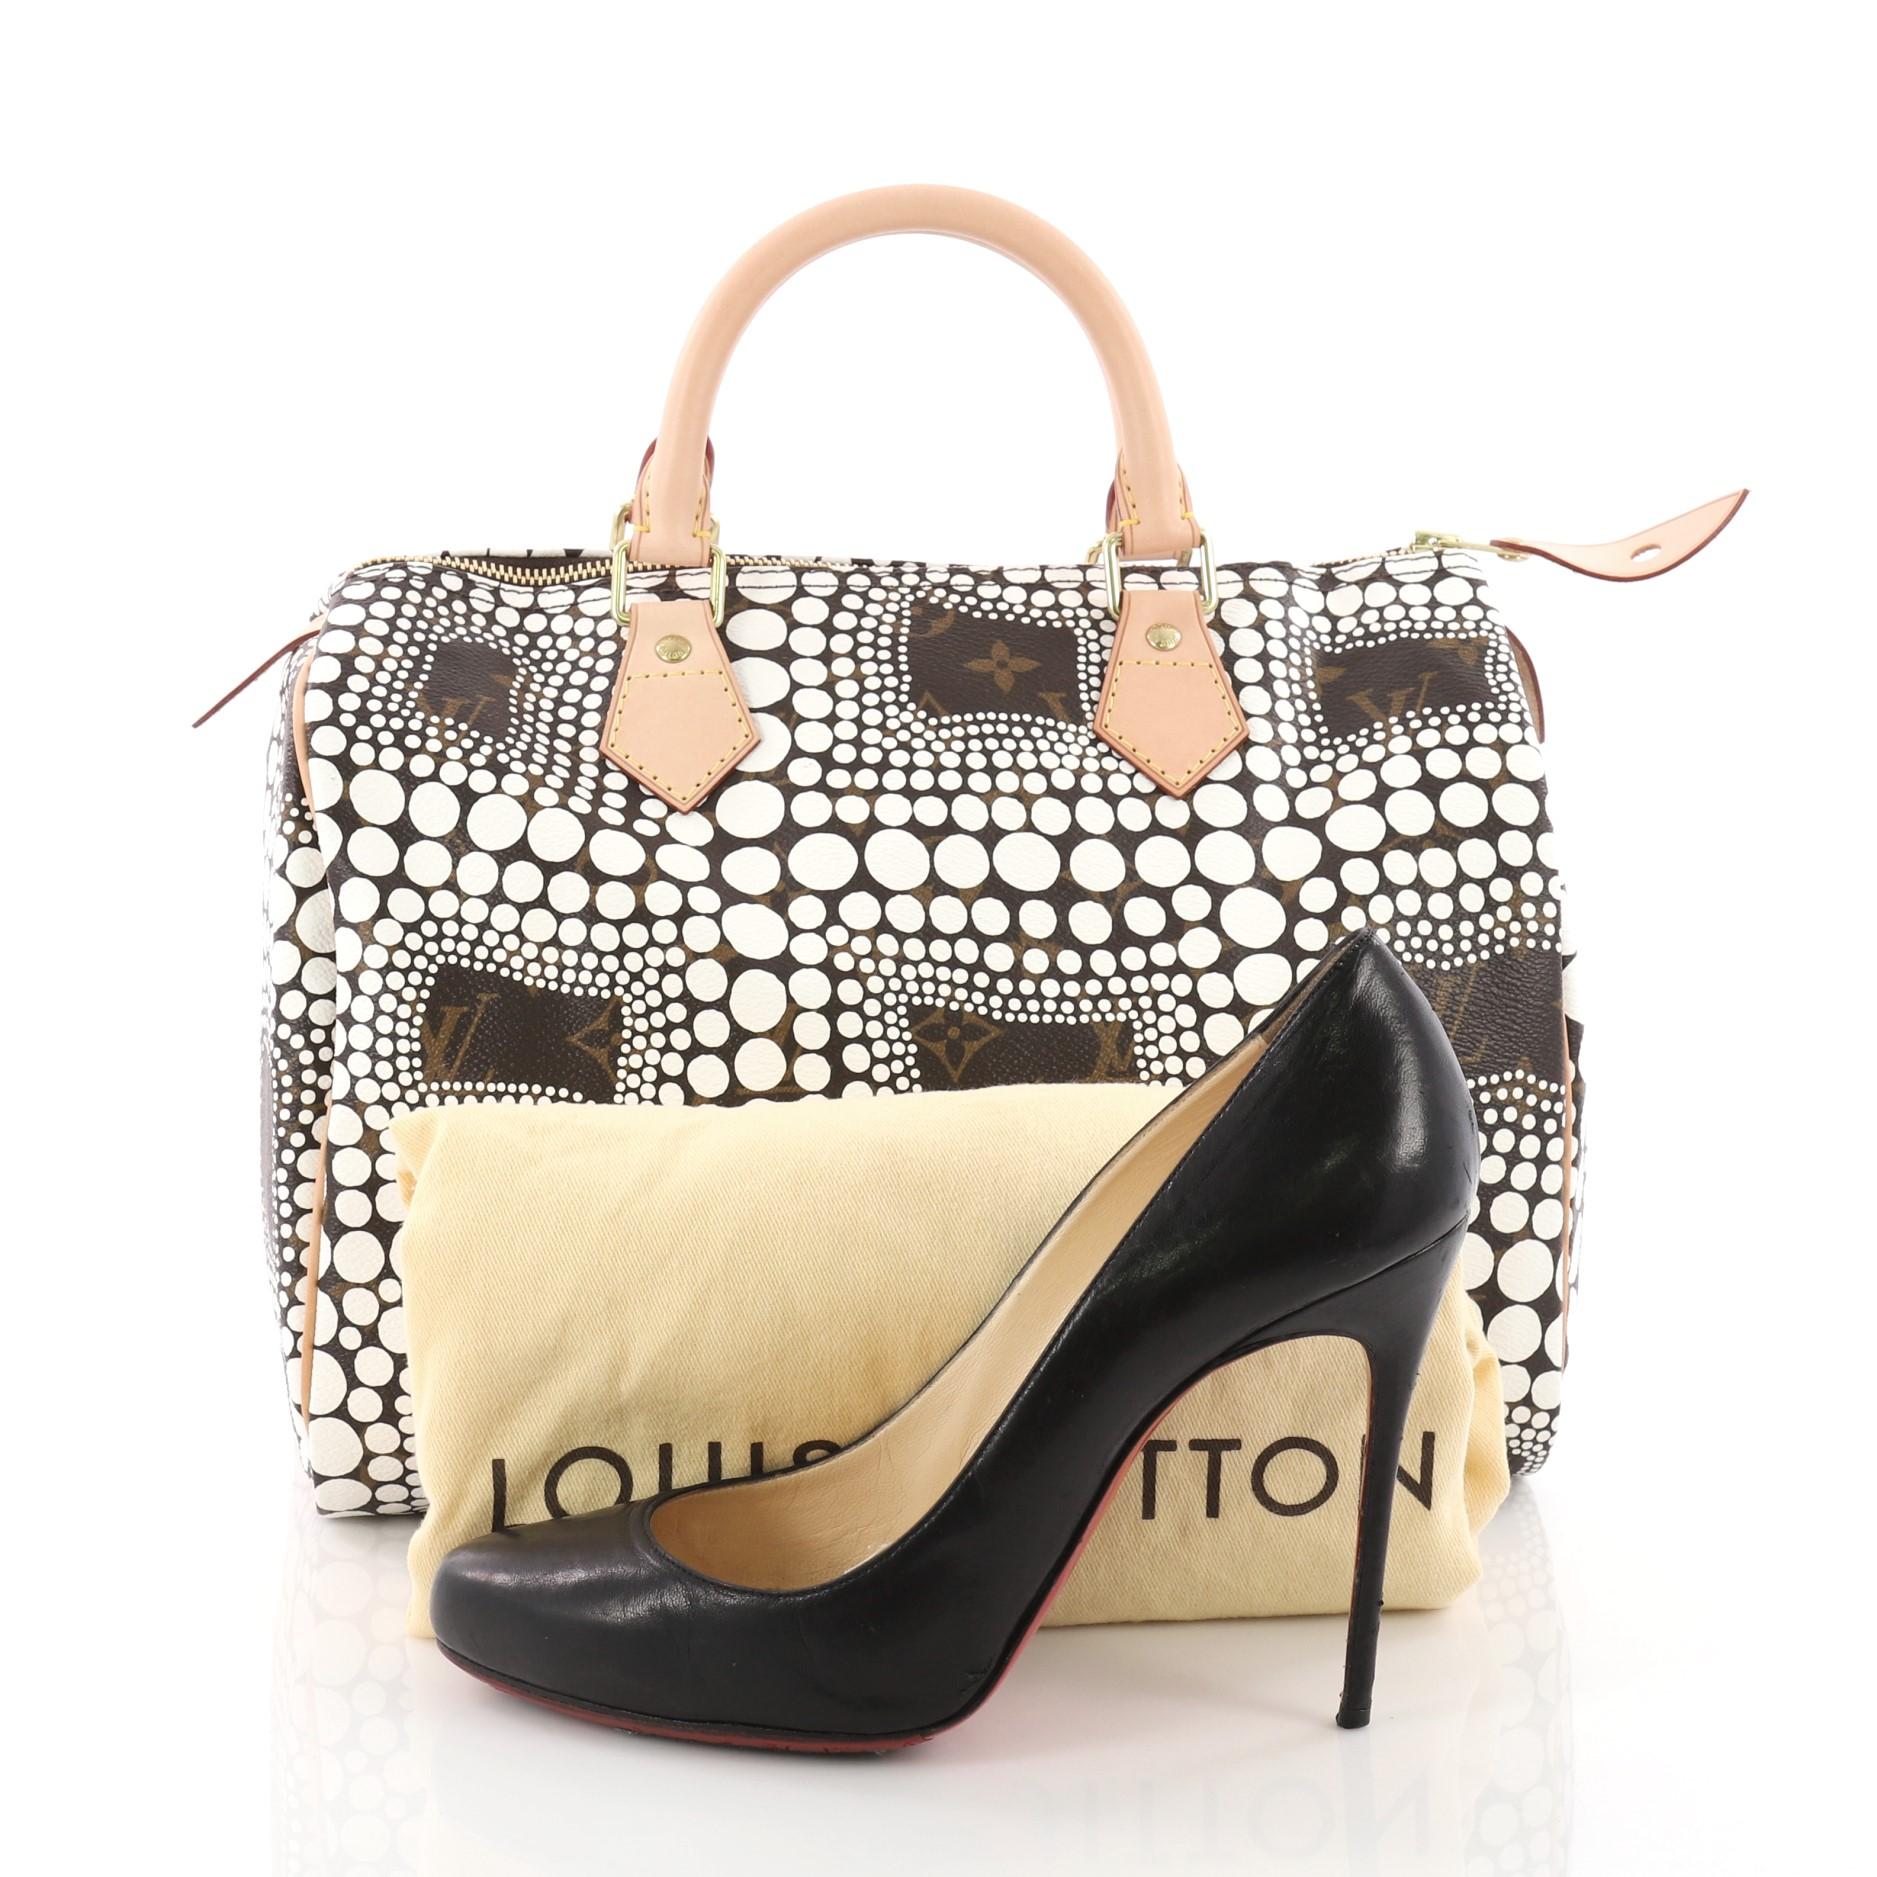 This authentic Louis Vuitton Speedy Handbag Limited Edition Monogram Canvas Kusama Town 30 showcases a design created by renowned Japanese artist Yayoi Kusama. Crafted from Louis Vuitton's brown monogram canvas, this limited edition Speedy features